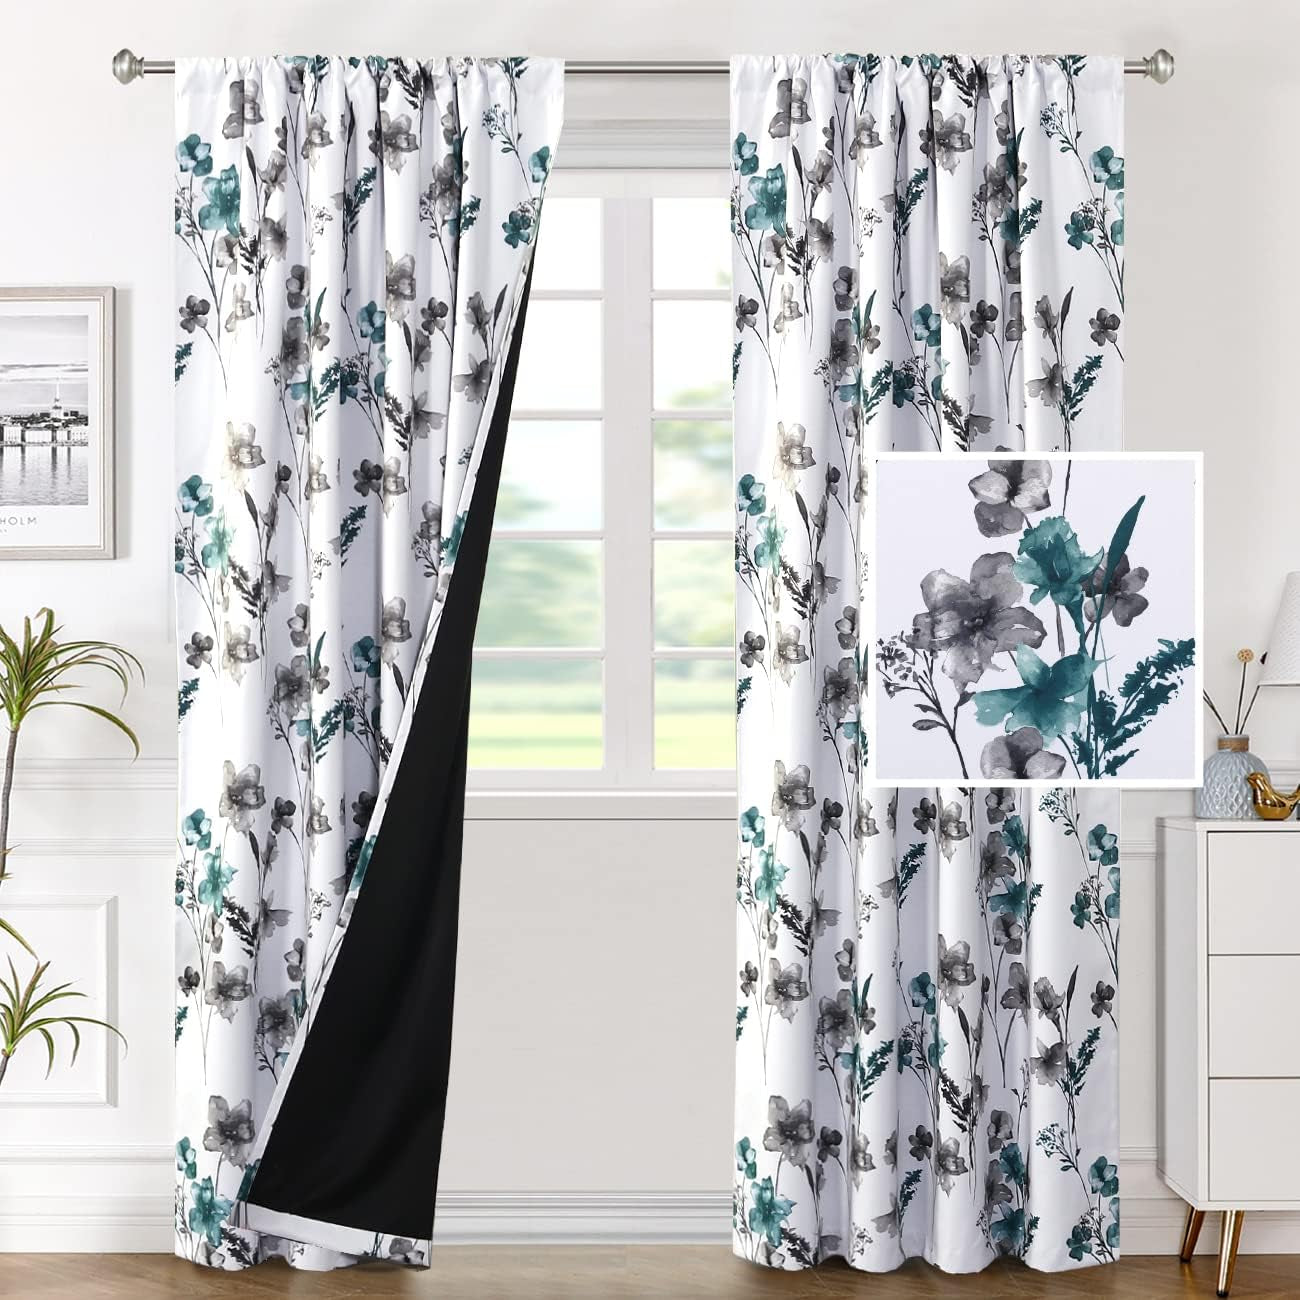 H.VERSAILTEX 100% Blackout Curtains for Bedroom Cattleya Floral Printed Drapes 84 Inches Long Leah Floral Pattern Full Light Blocking Drapes with Black Liner Rod Pocket 2 Panels, Navy/Taupe  H.VERSAILTEX Grey/Teal 52"W X 84"L 